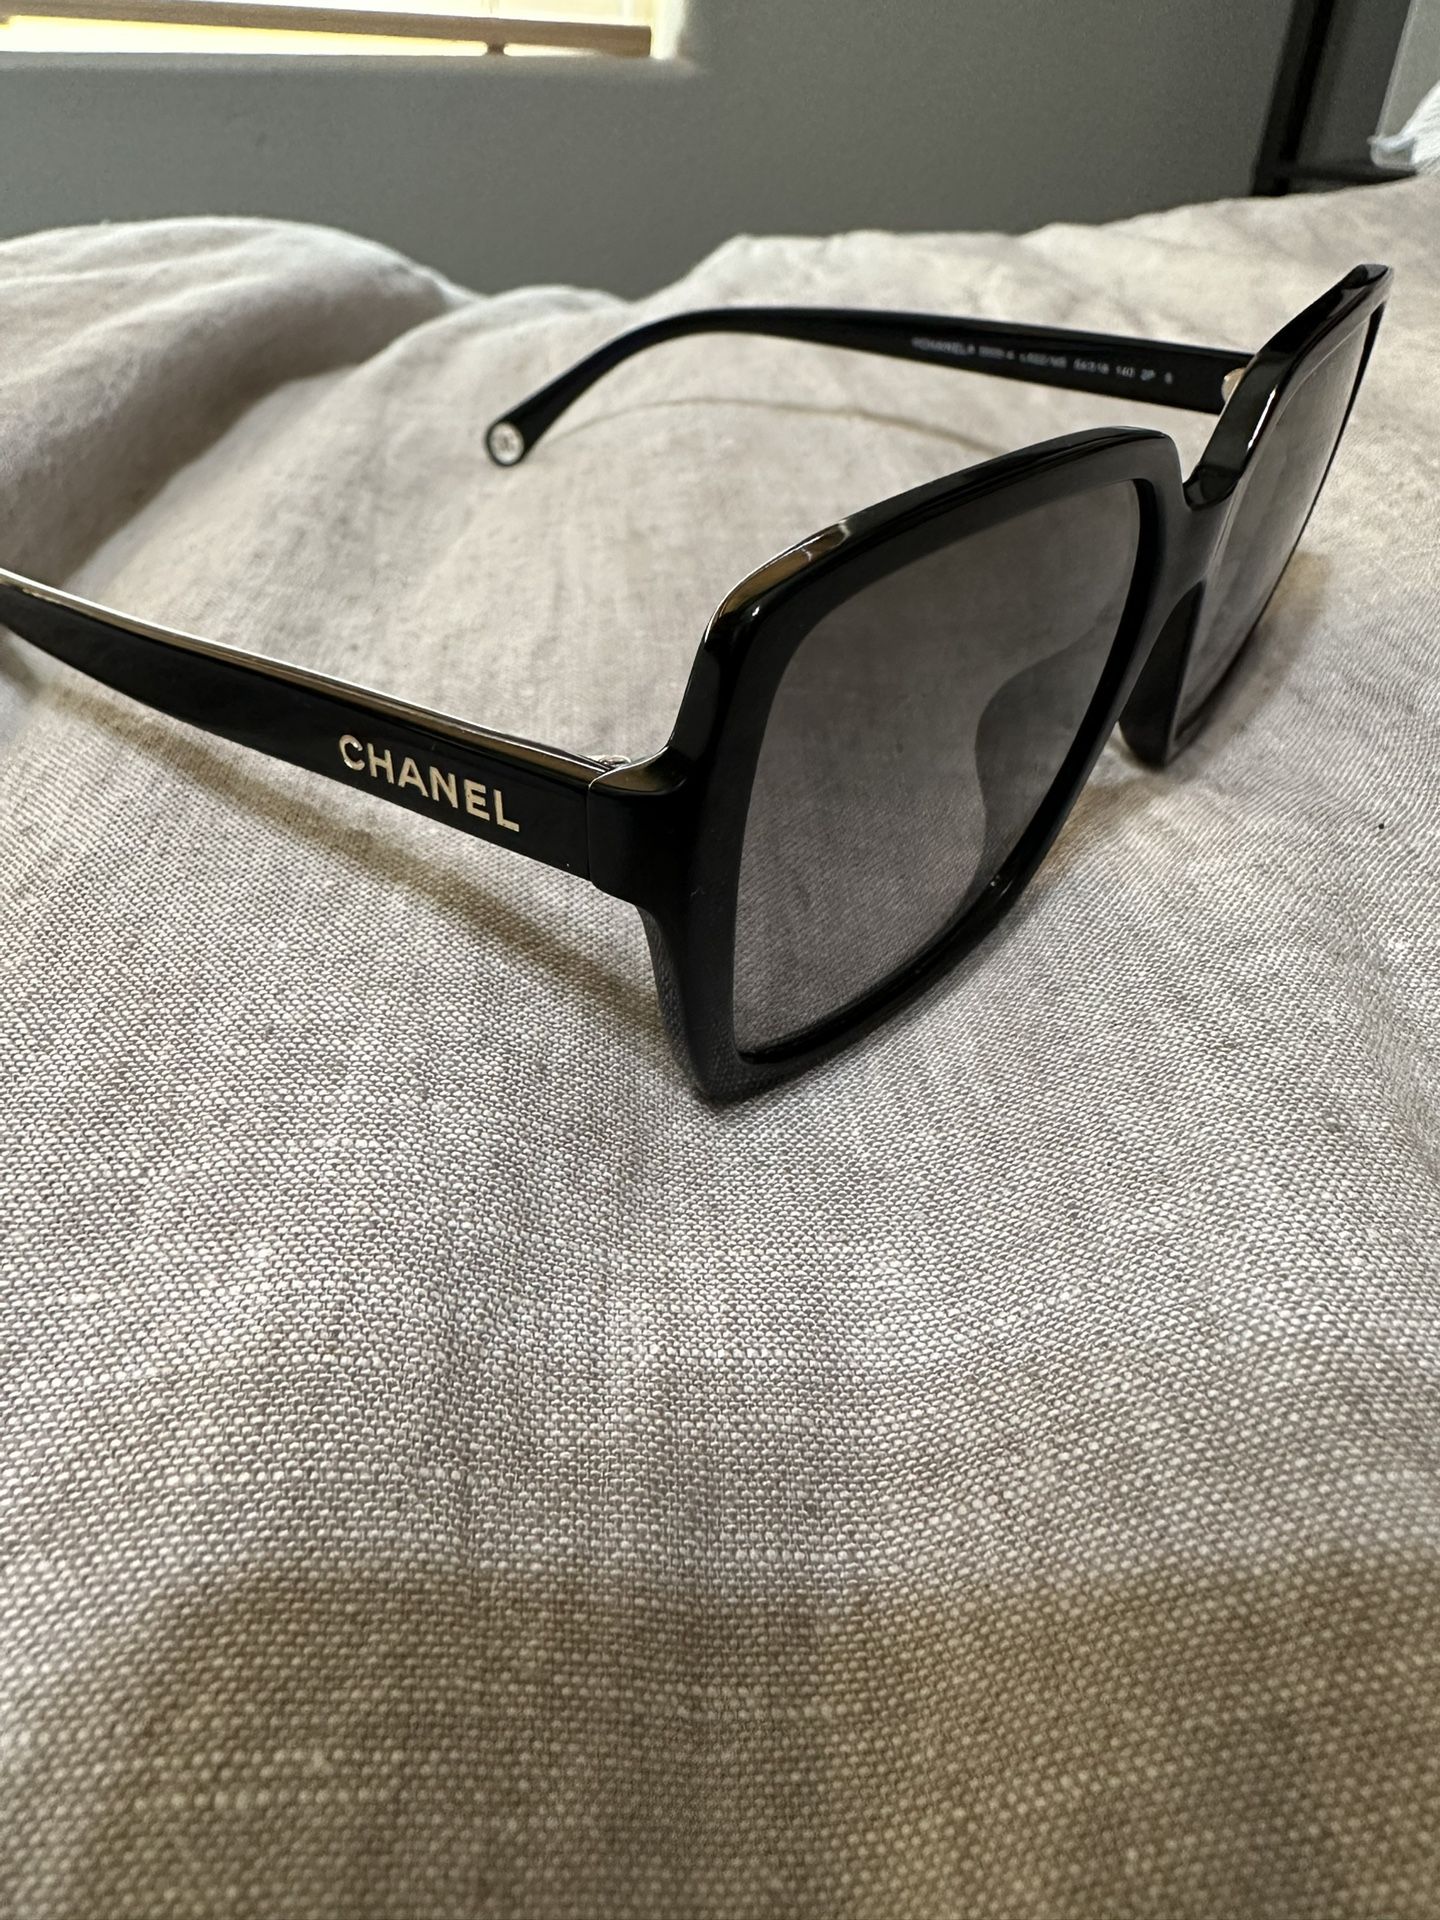 New Chanel Model 5505-A Square Frame Polarized Women's Sunglasses Never  Worn for Sale in Menifee, CA - OfferUp